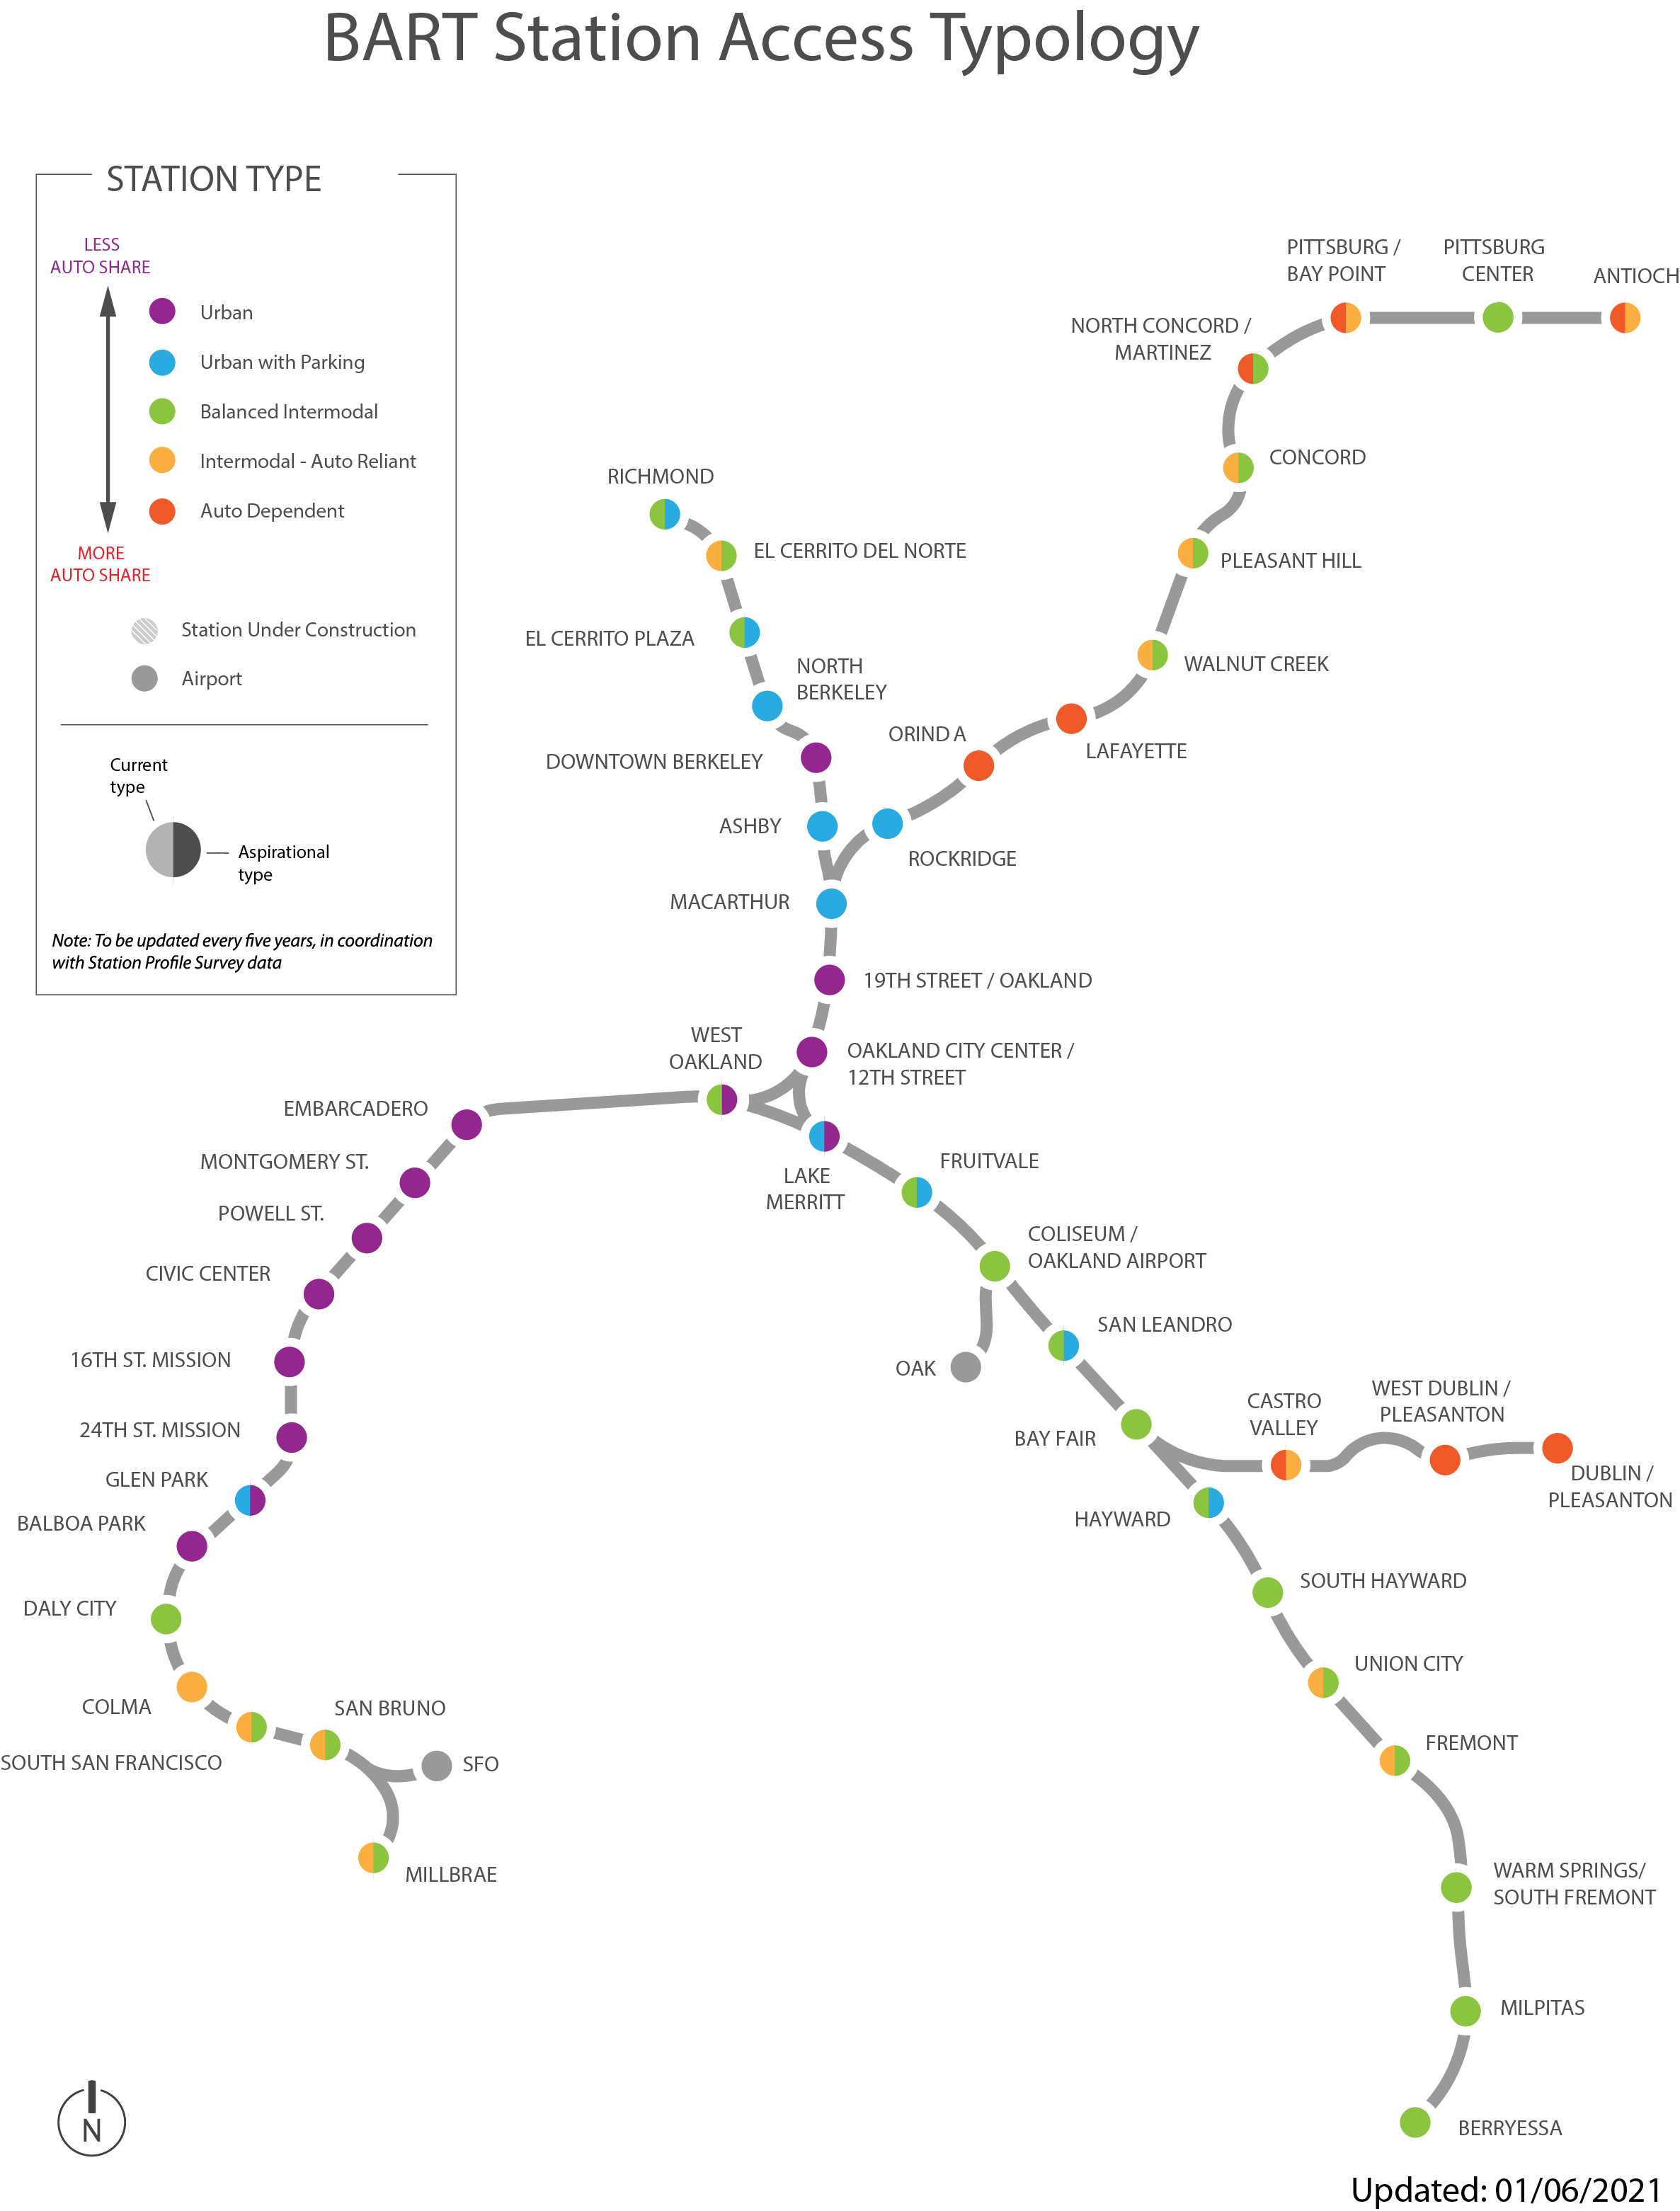 Station Access Typology Map, updated January 2021